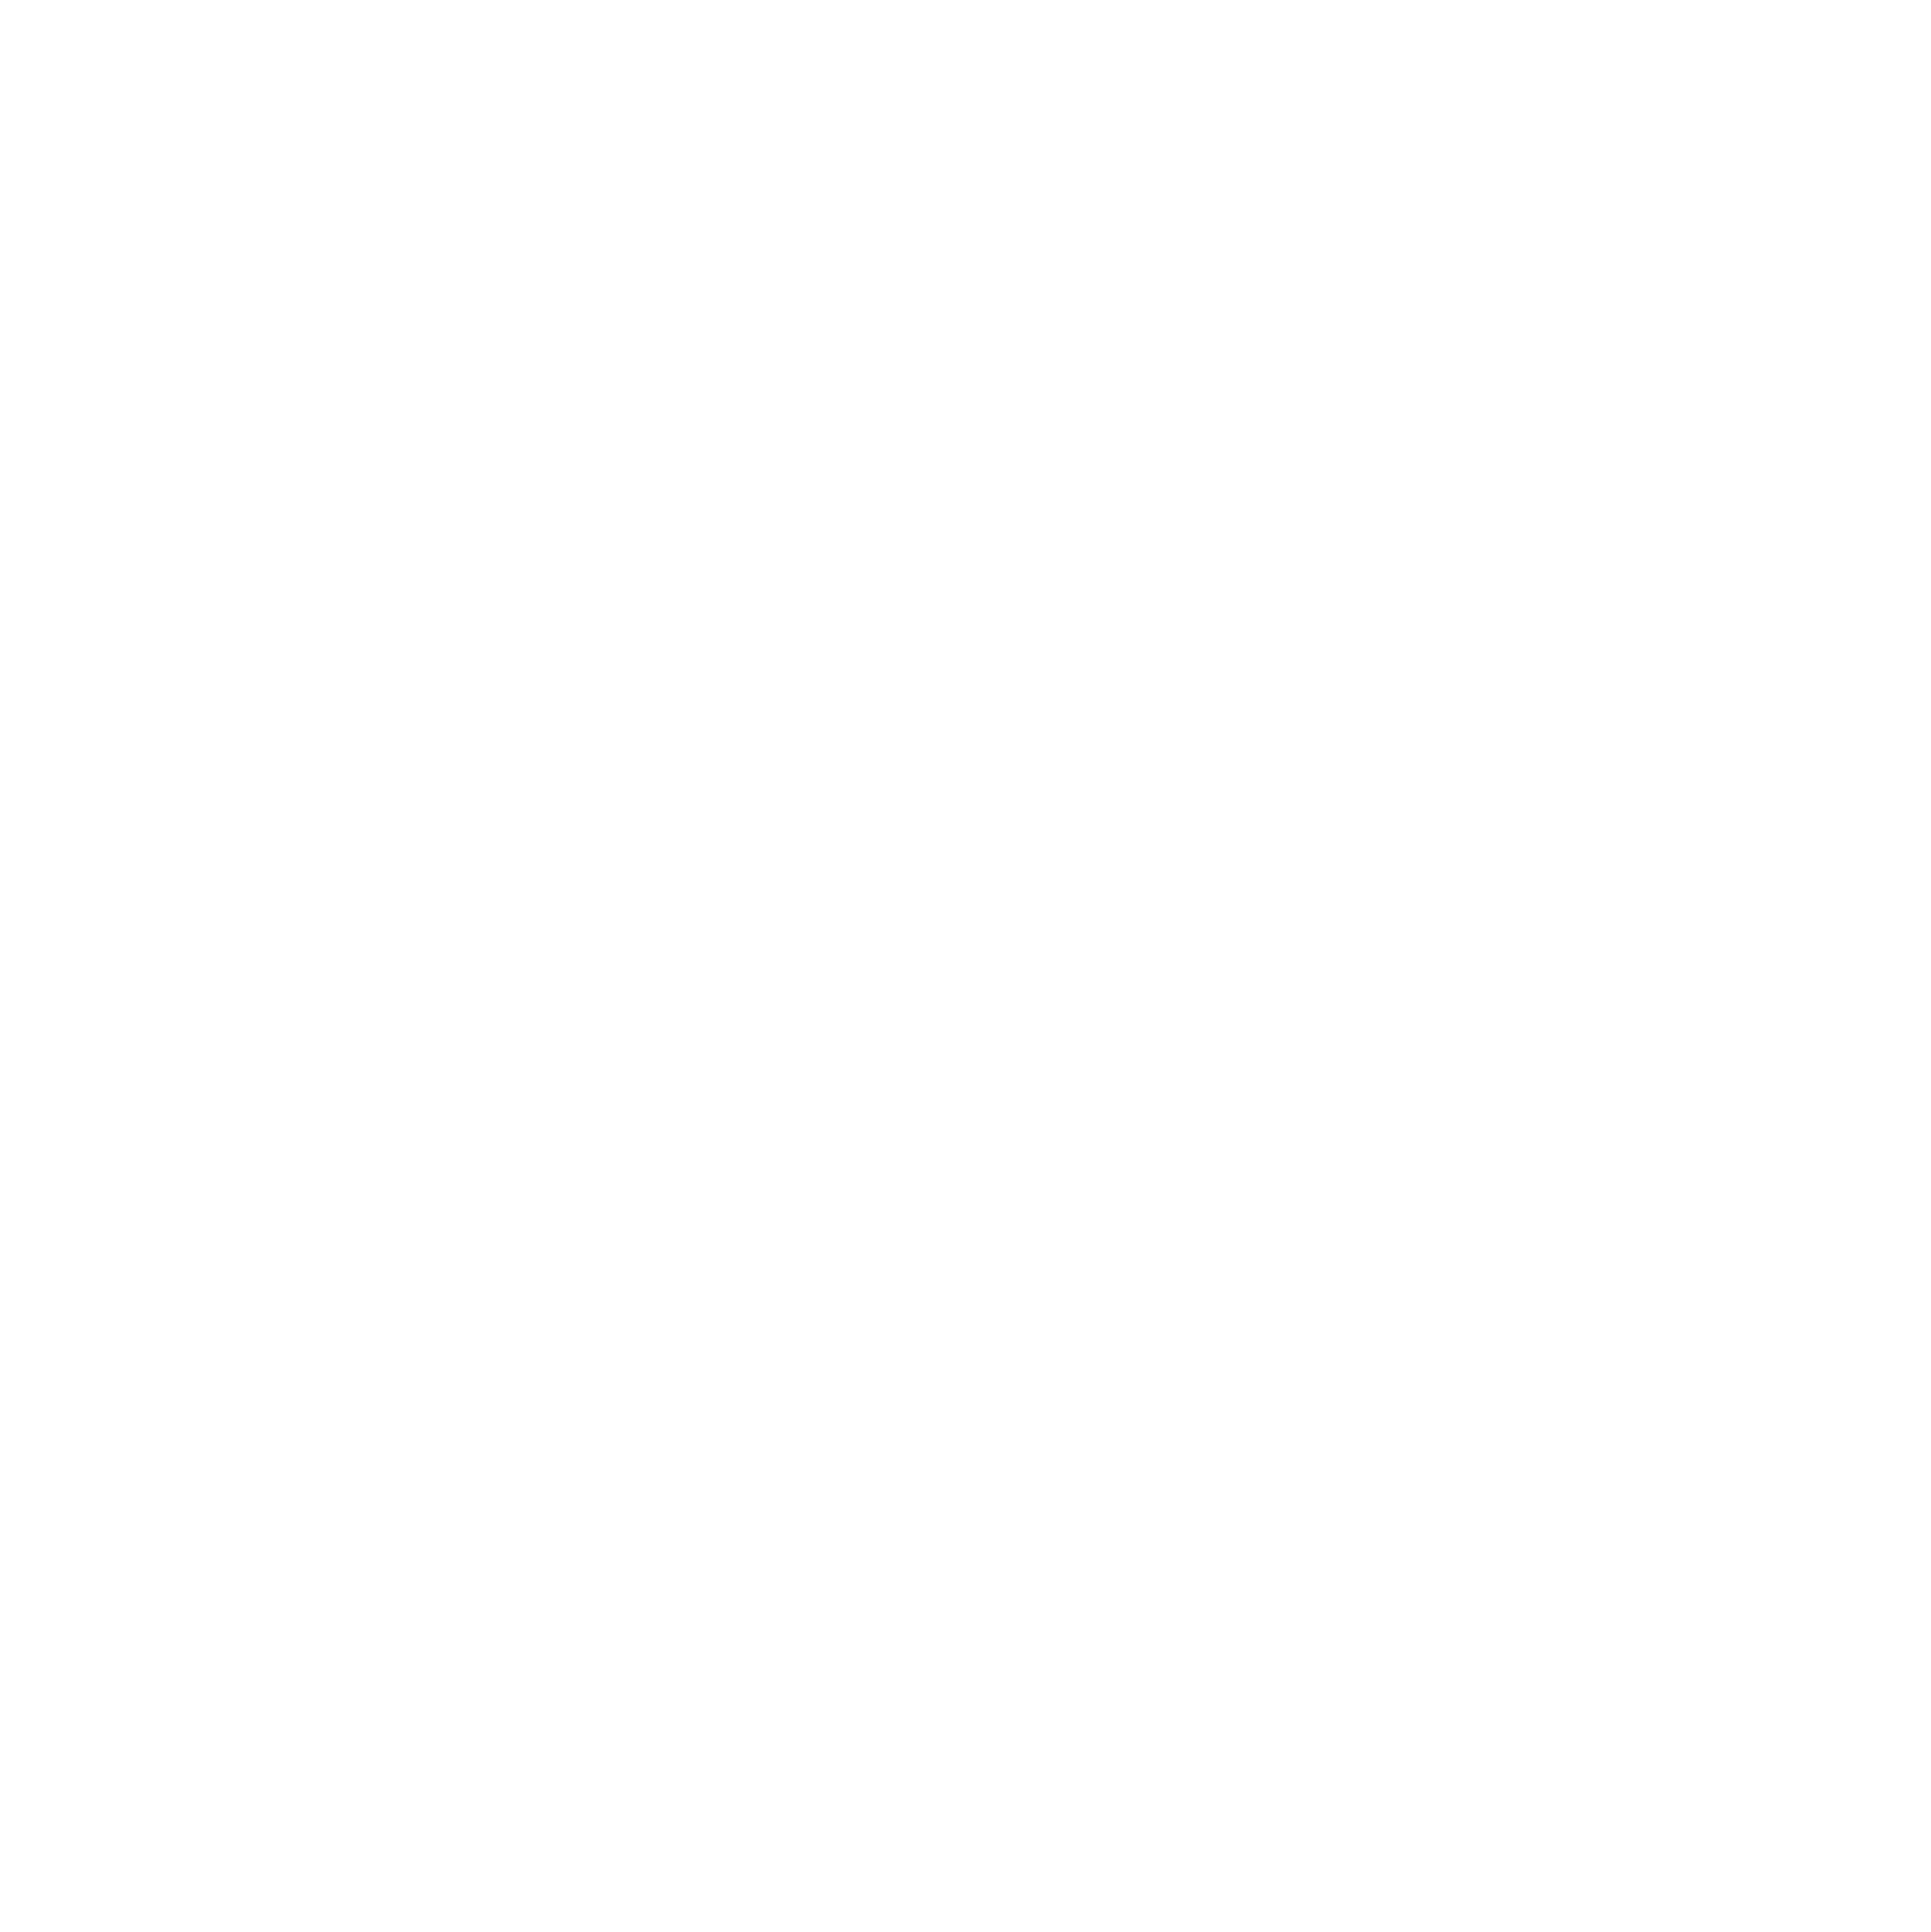 refund boost icon of a rocket with a dollar sign in it